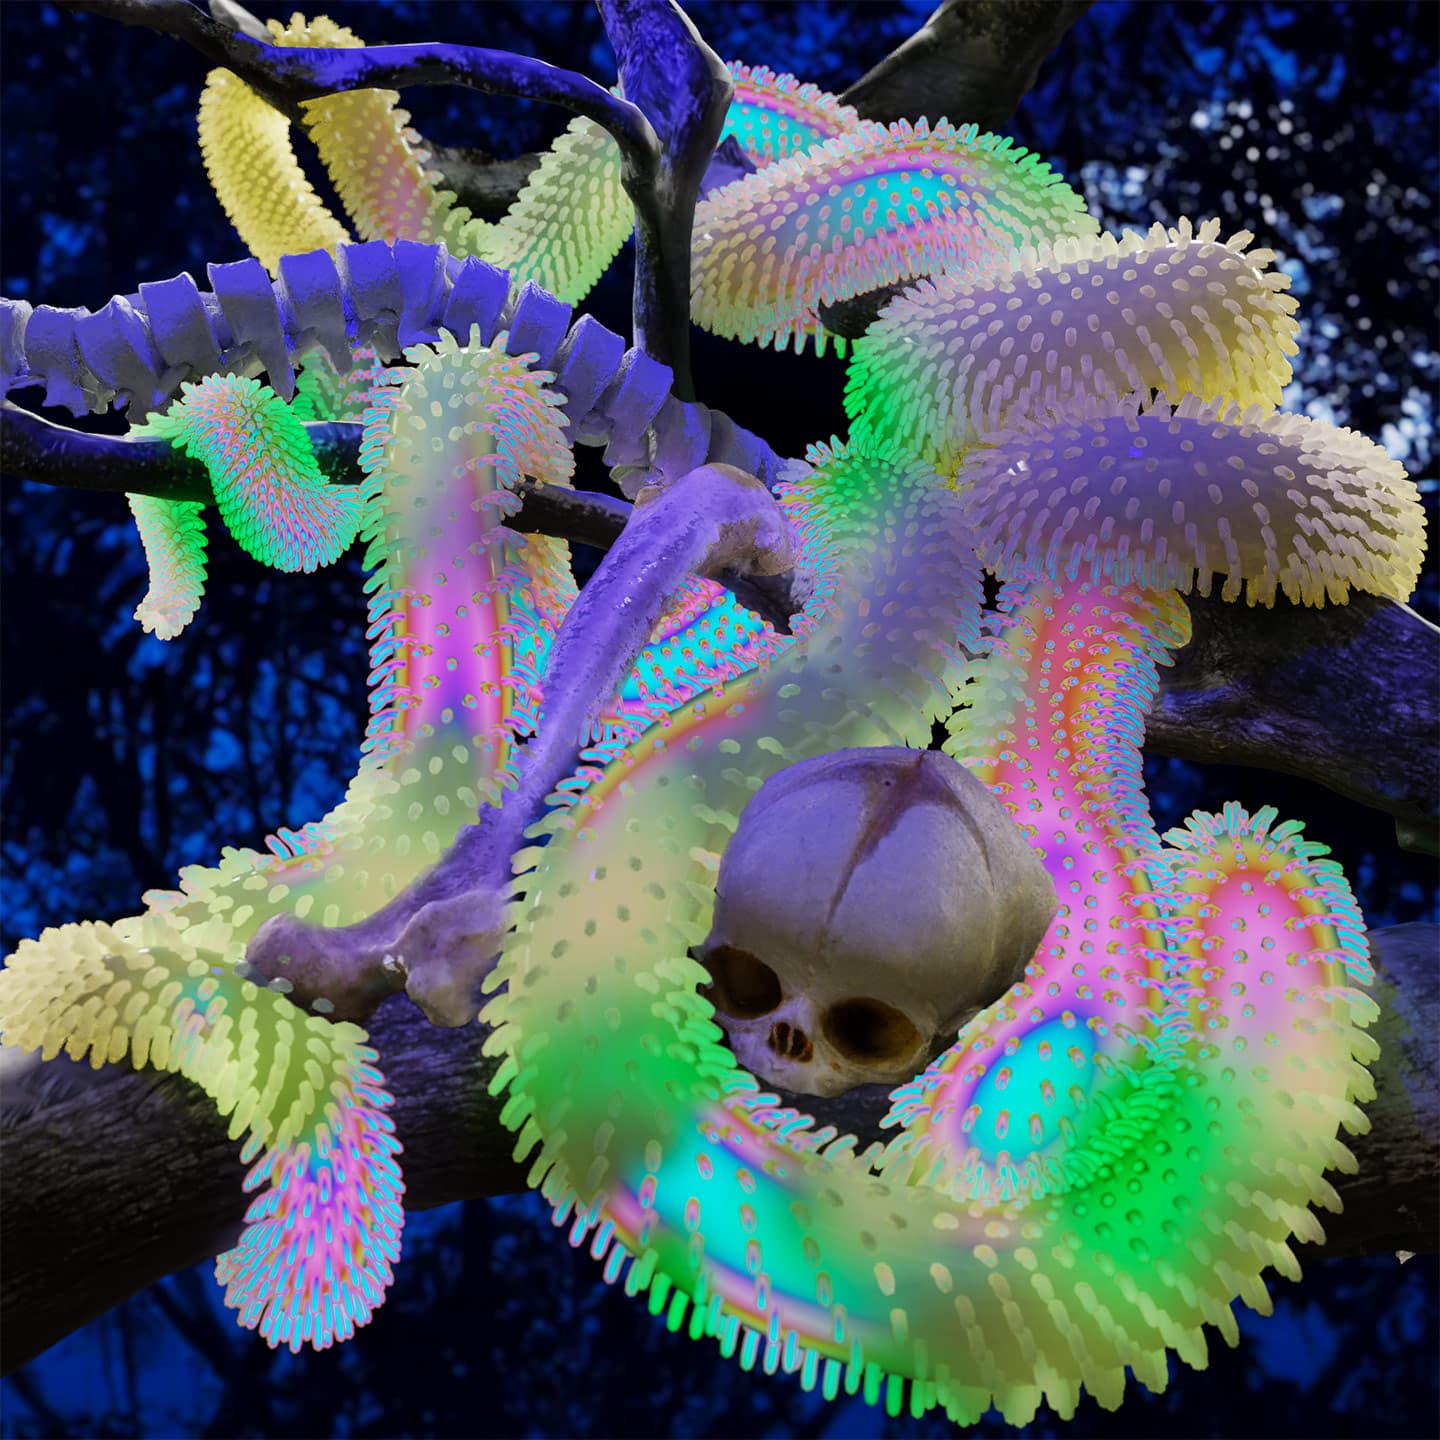 CGI image of a magic rubber snake coiling on a tree branch with skulls